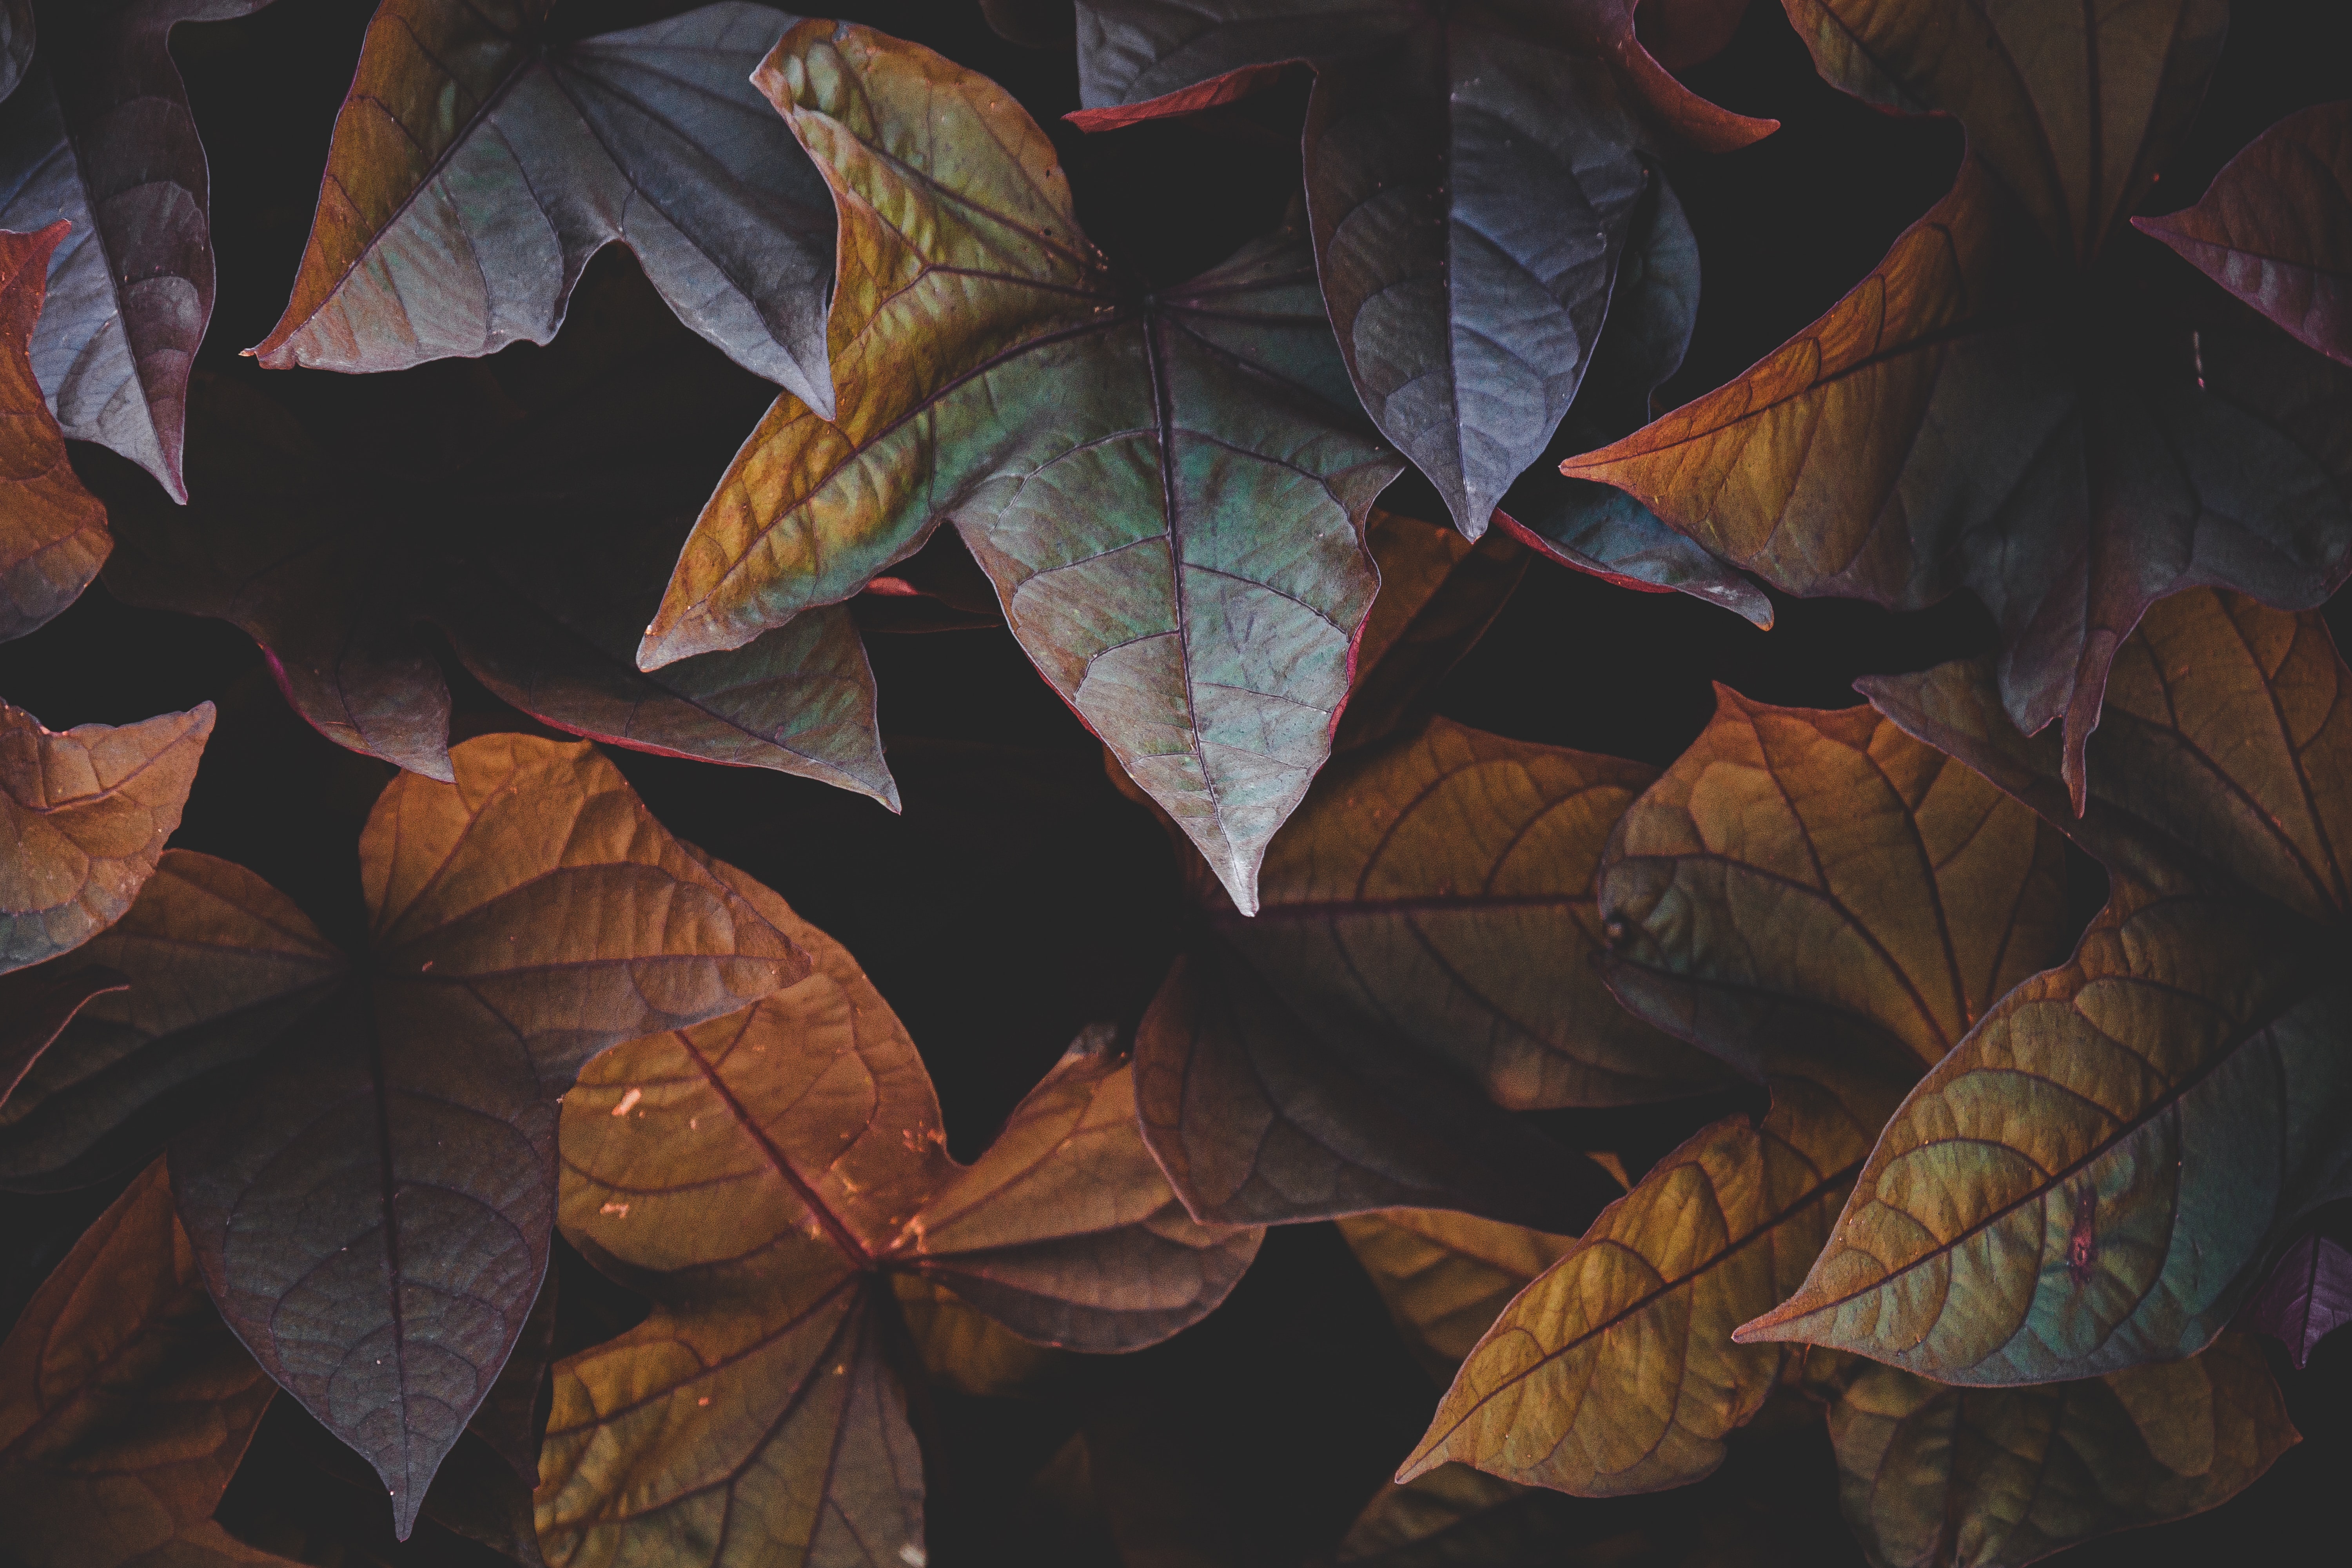 83520 download wallpaper leaves, cinnamon, plant, dark screensavers and pictures for free